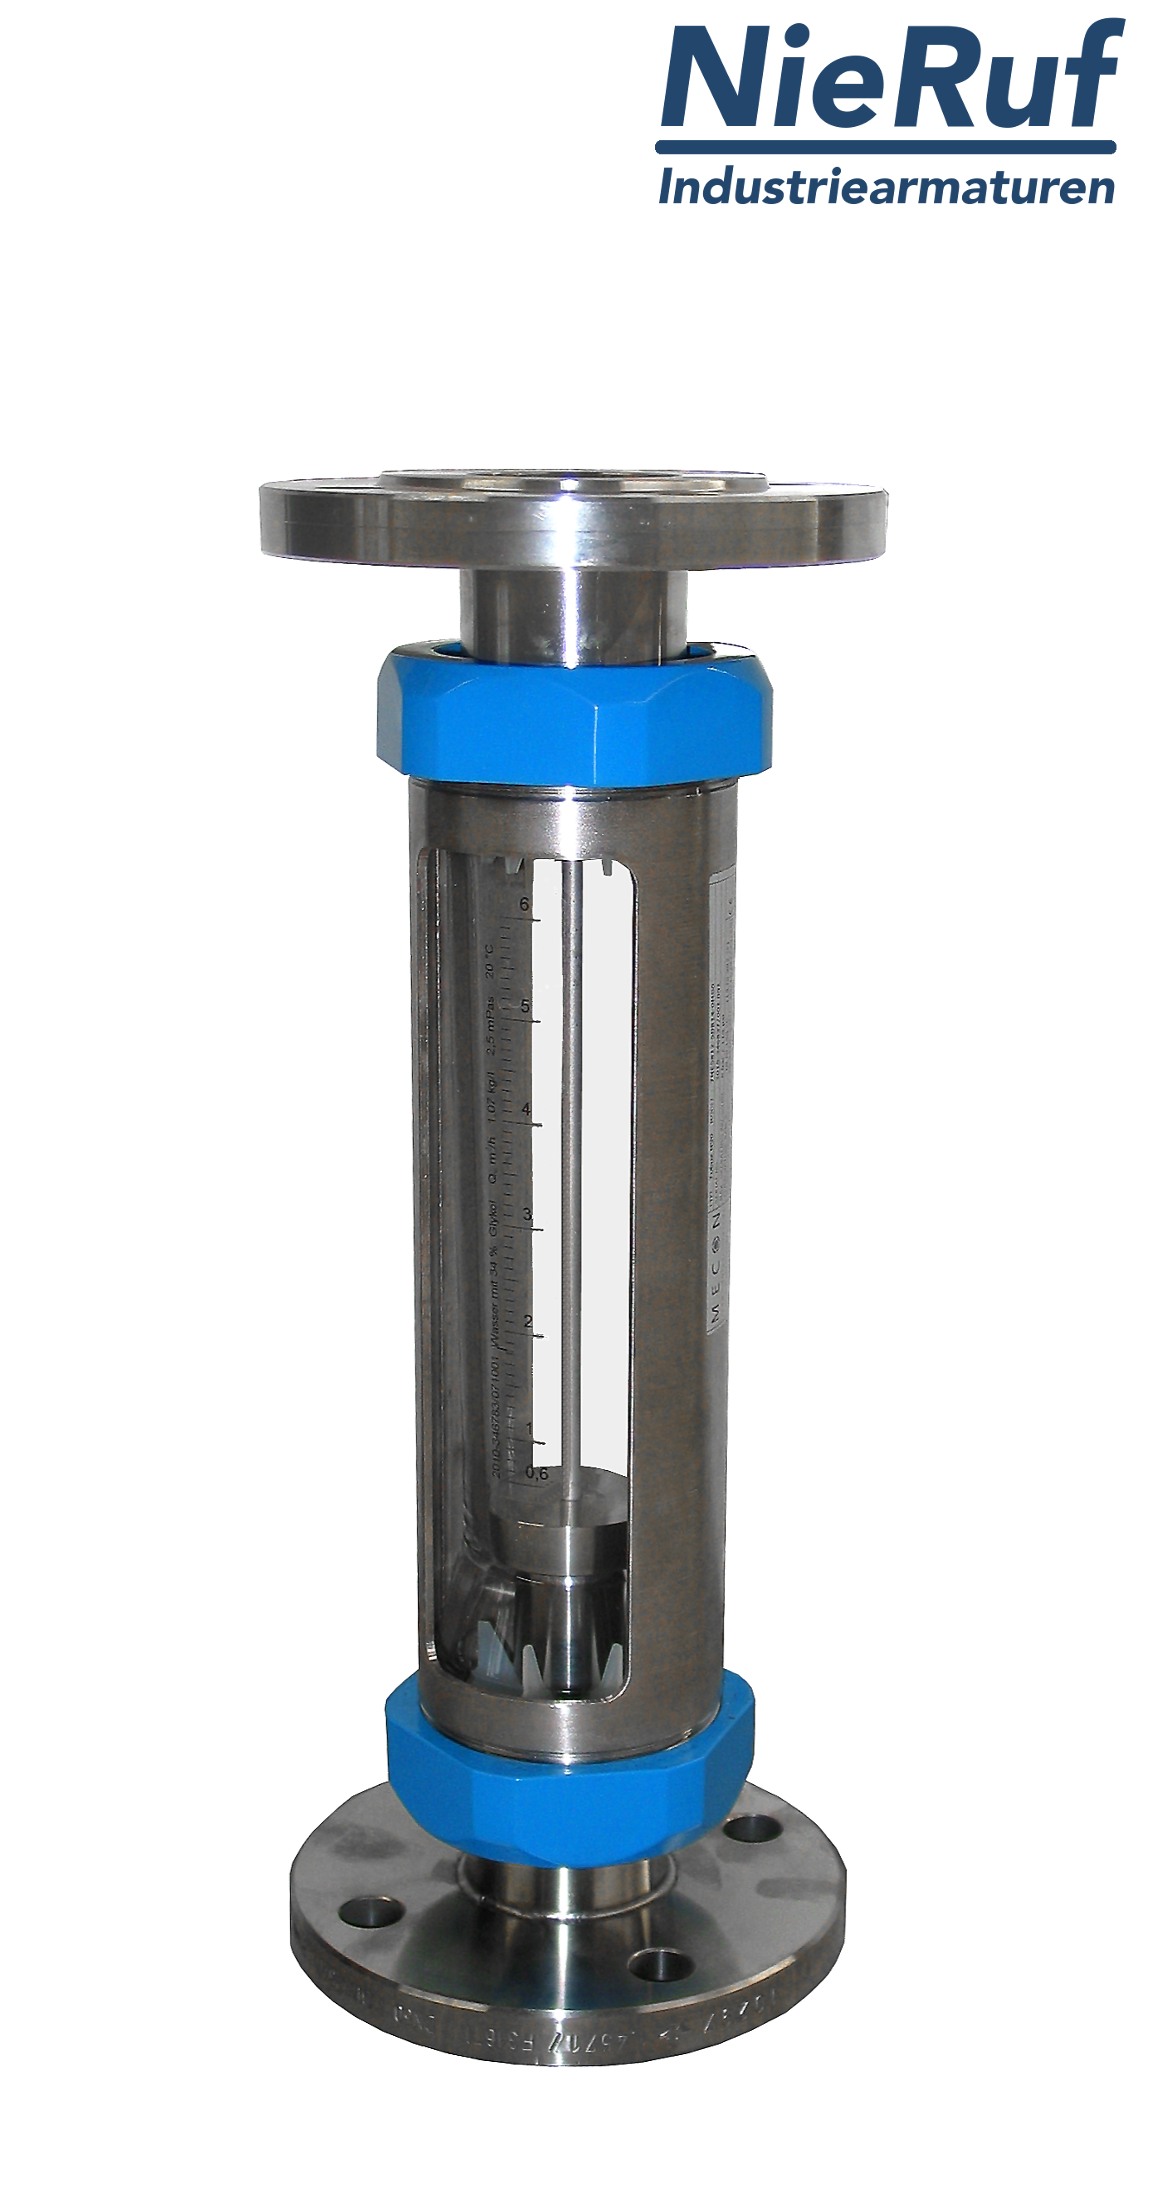 Variable area flowmeter stainless steel + borosilicate flange DN15 1.6 - 16.0 l/h water FKM